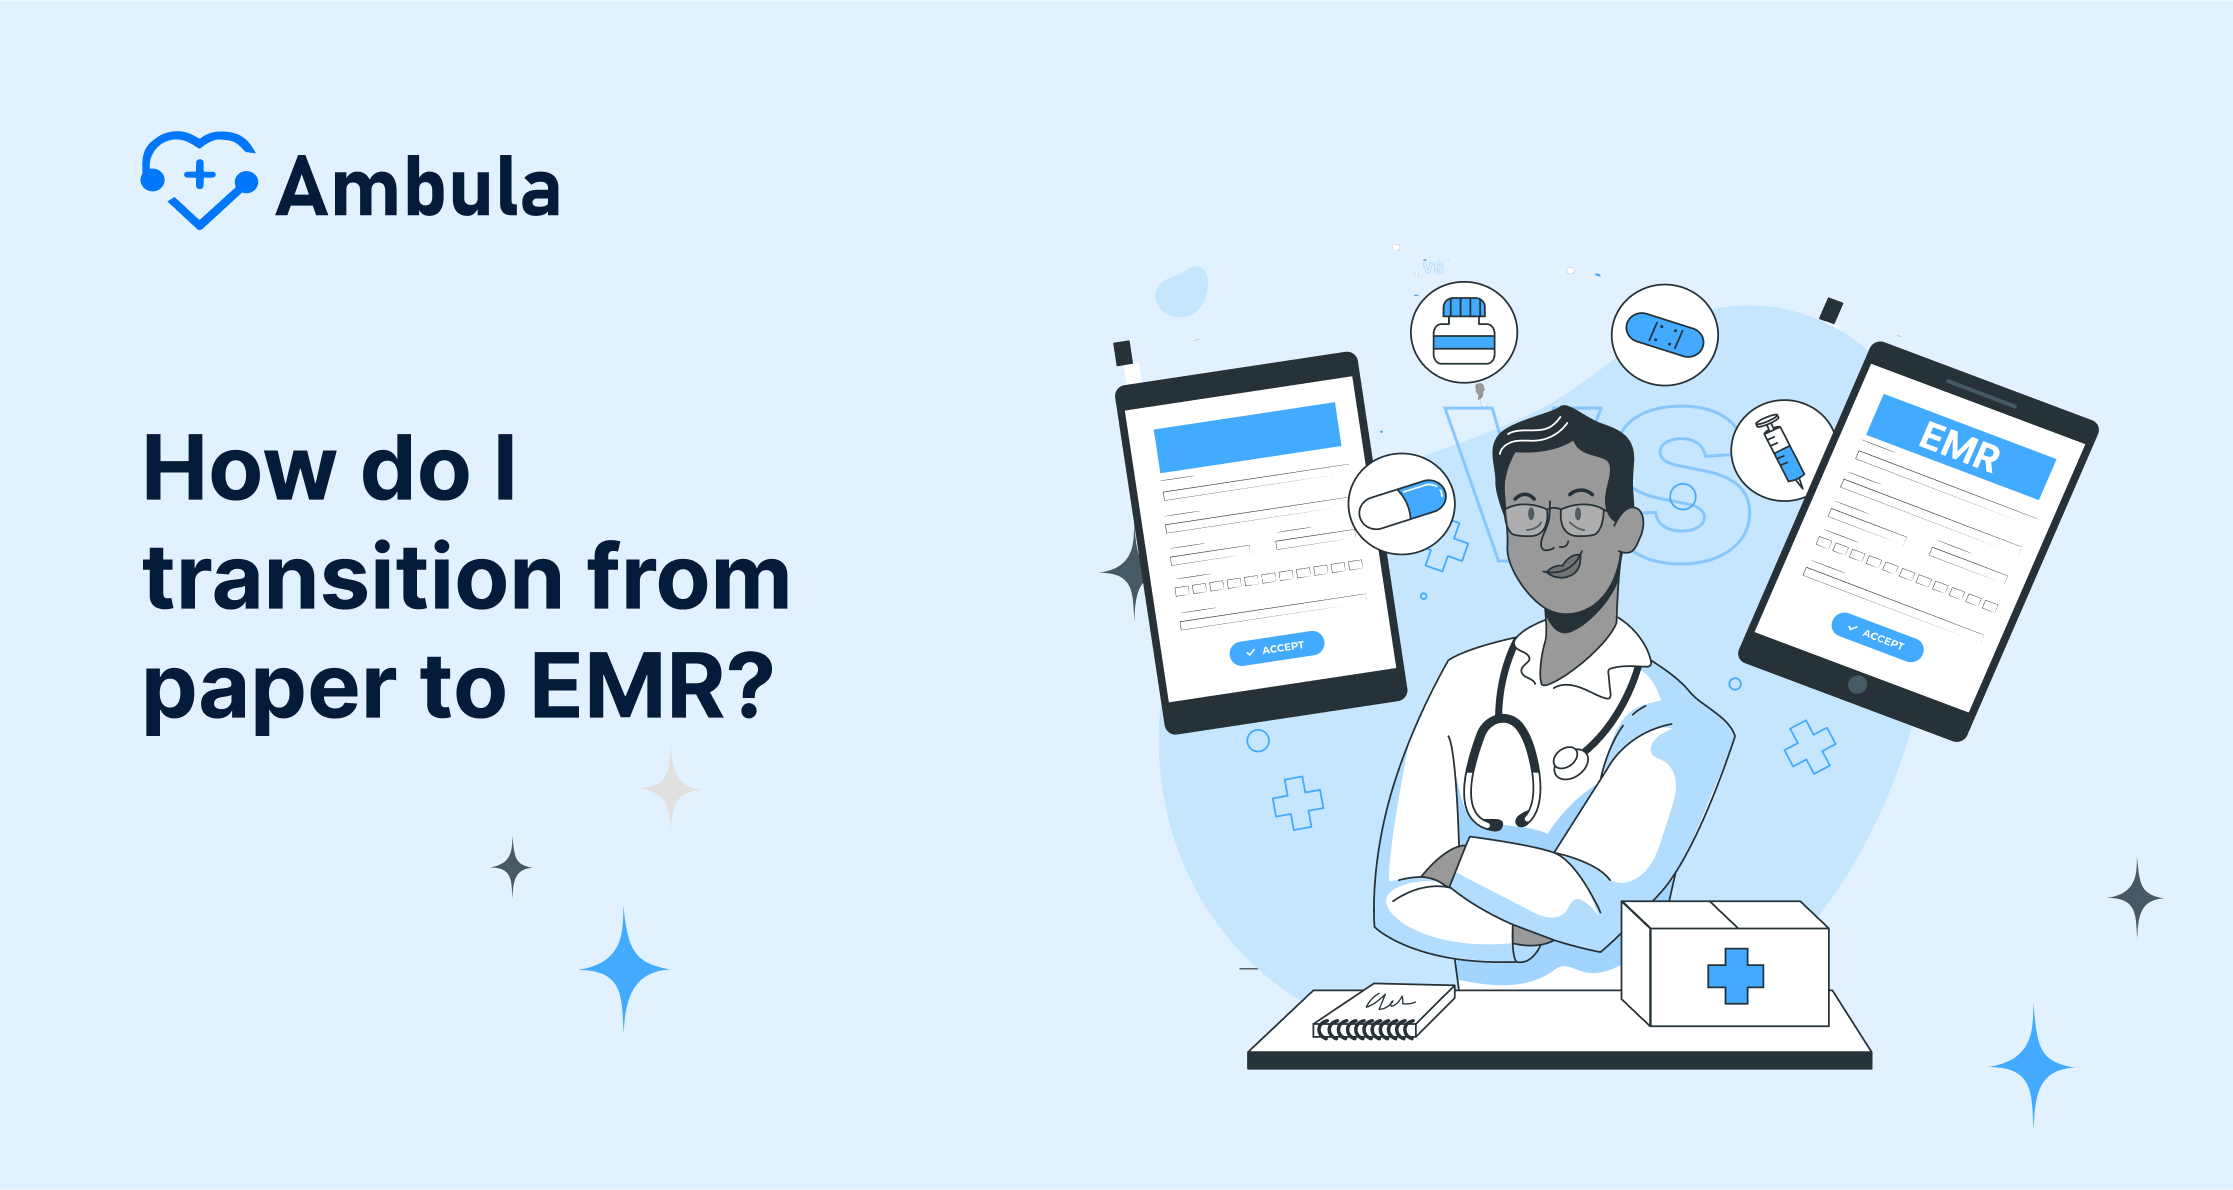 How do I transition from paper to EMR?